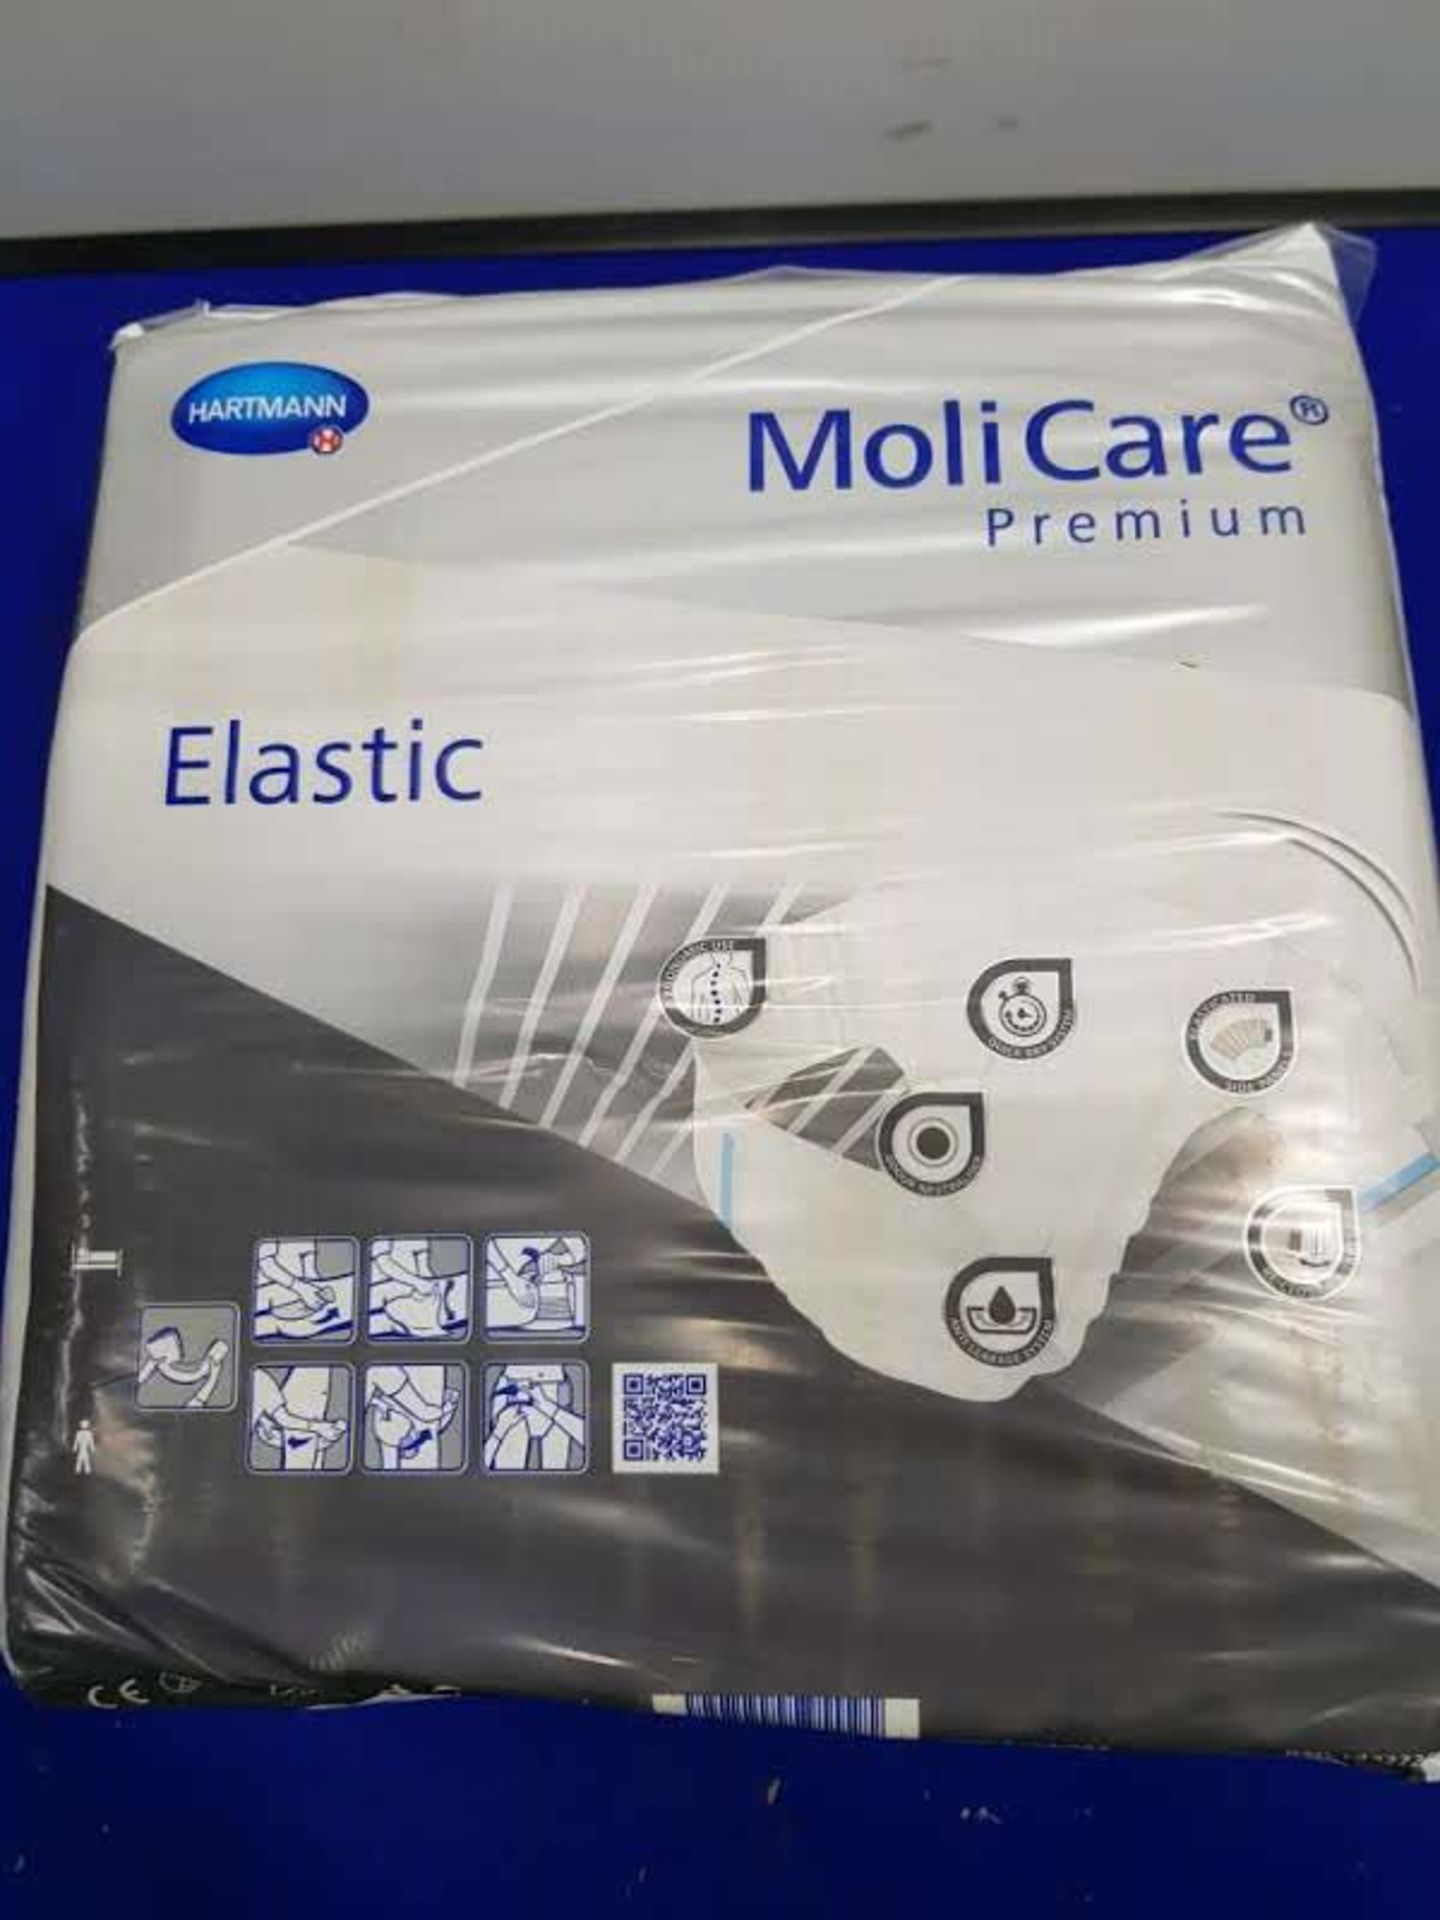 2x Packs Molicare Incontinence Briefs With Elastic Panels - Image 3 of 3